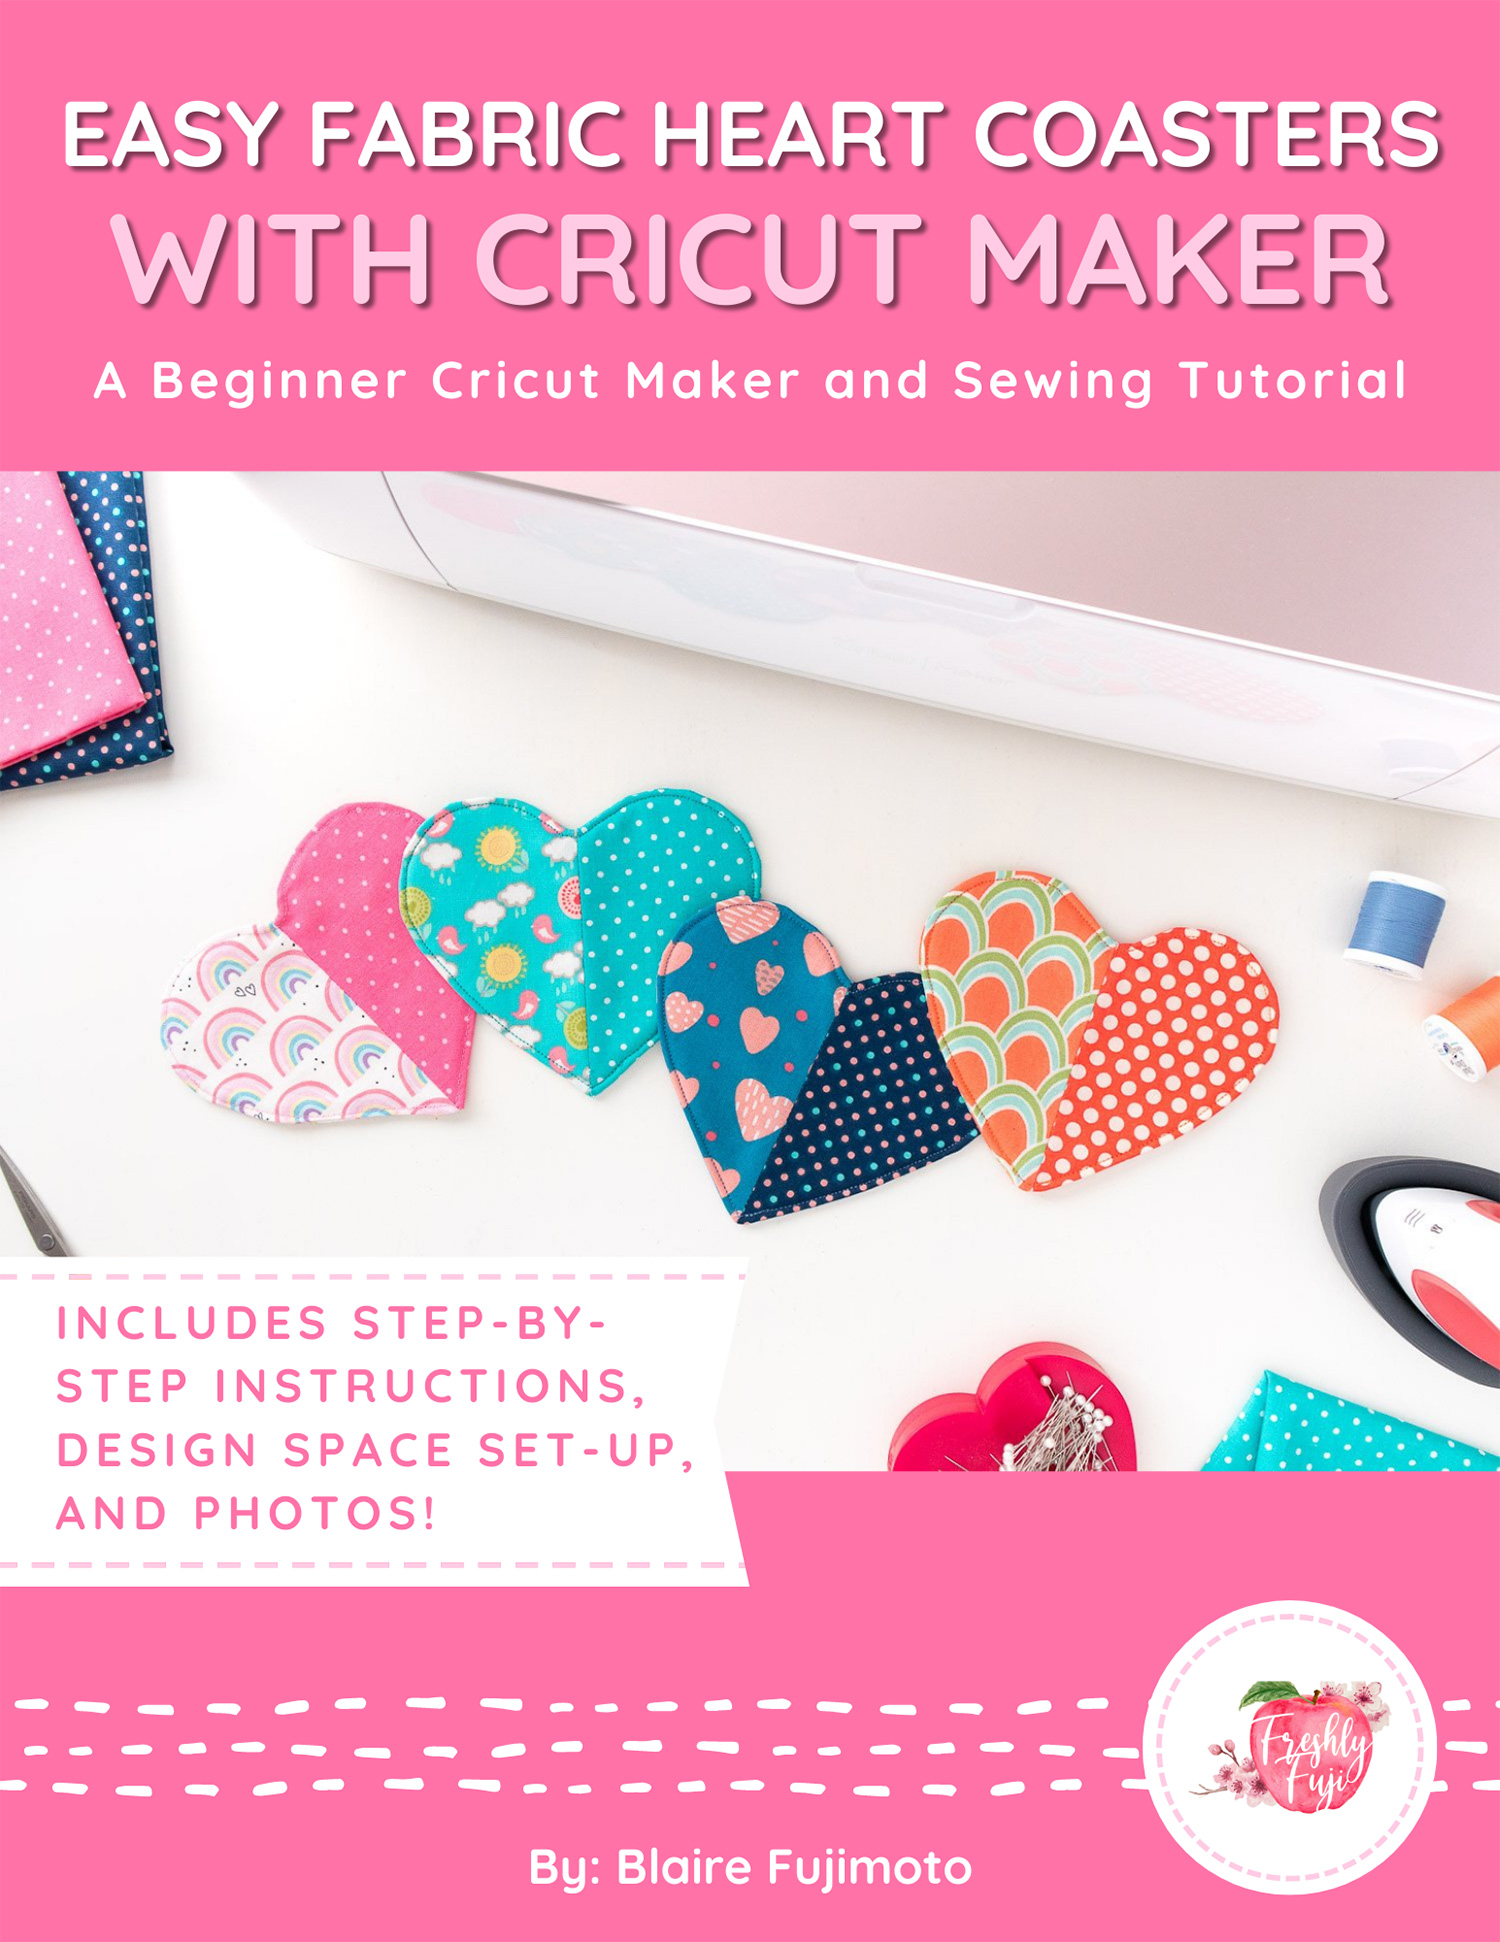 Cover for eBook titled "Easy Fabric Heart Coasters with Cricut Maker". Features photo of 4 printed heart coasters.